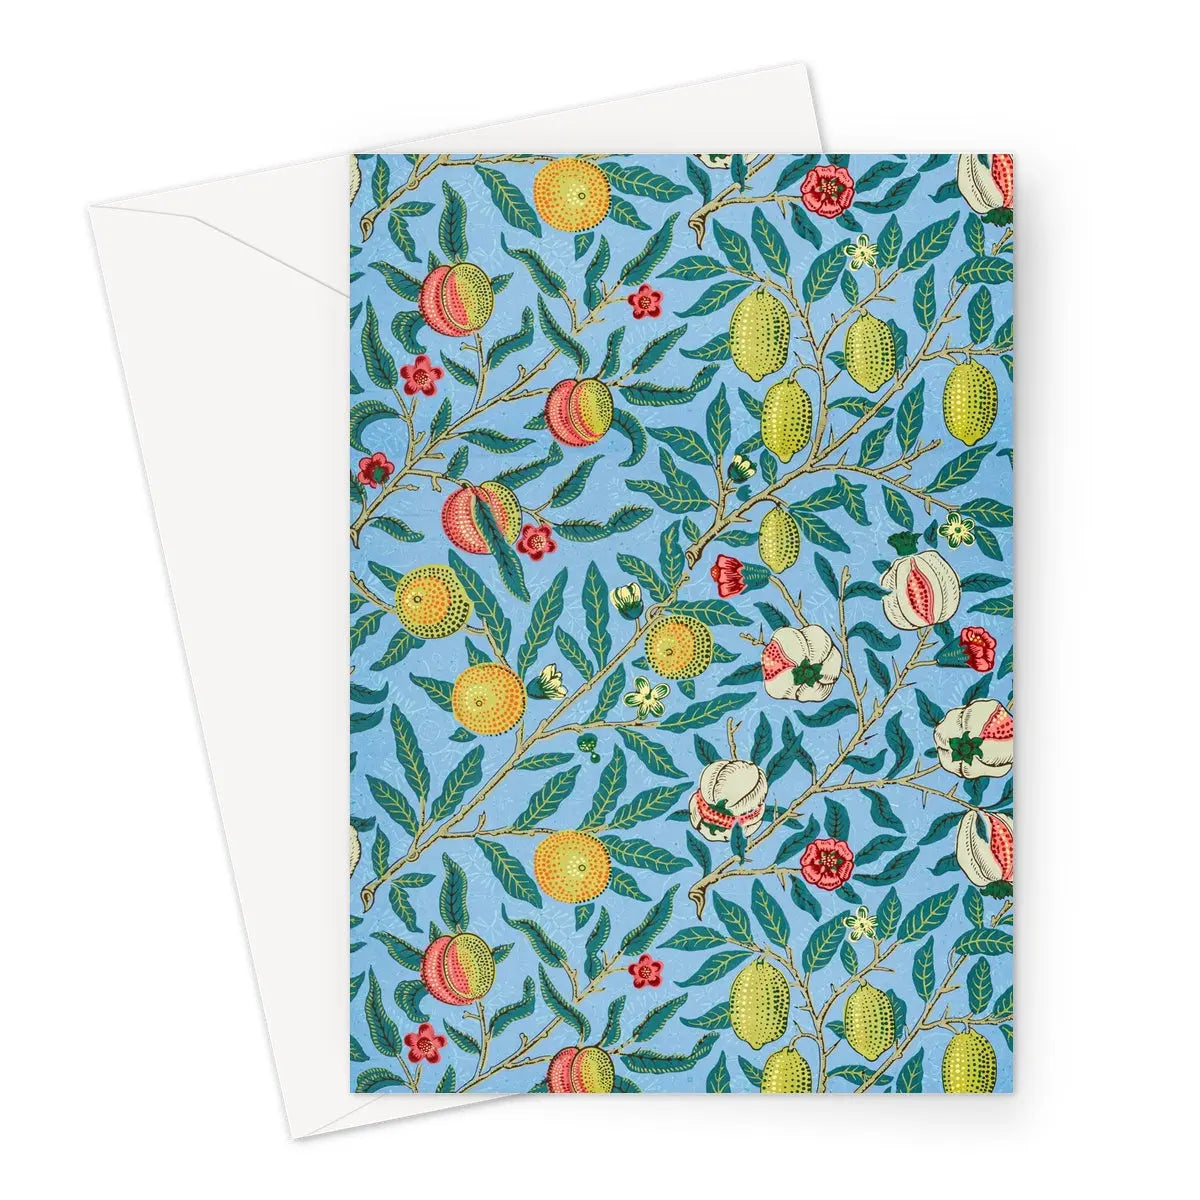 Four Fruits By William Morris Greeting Card - A5 Portrait / 1 Card - Greeting & Note Cards - Aesthetic Art